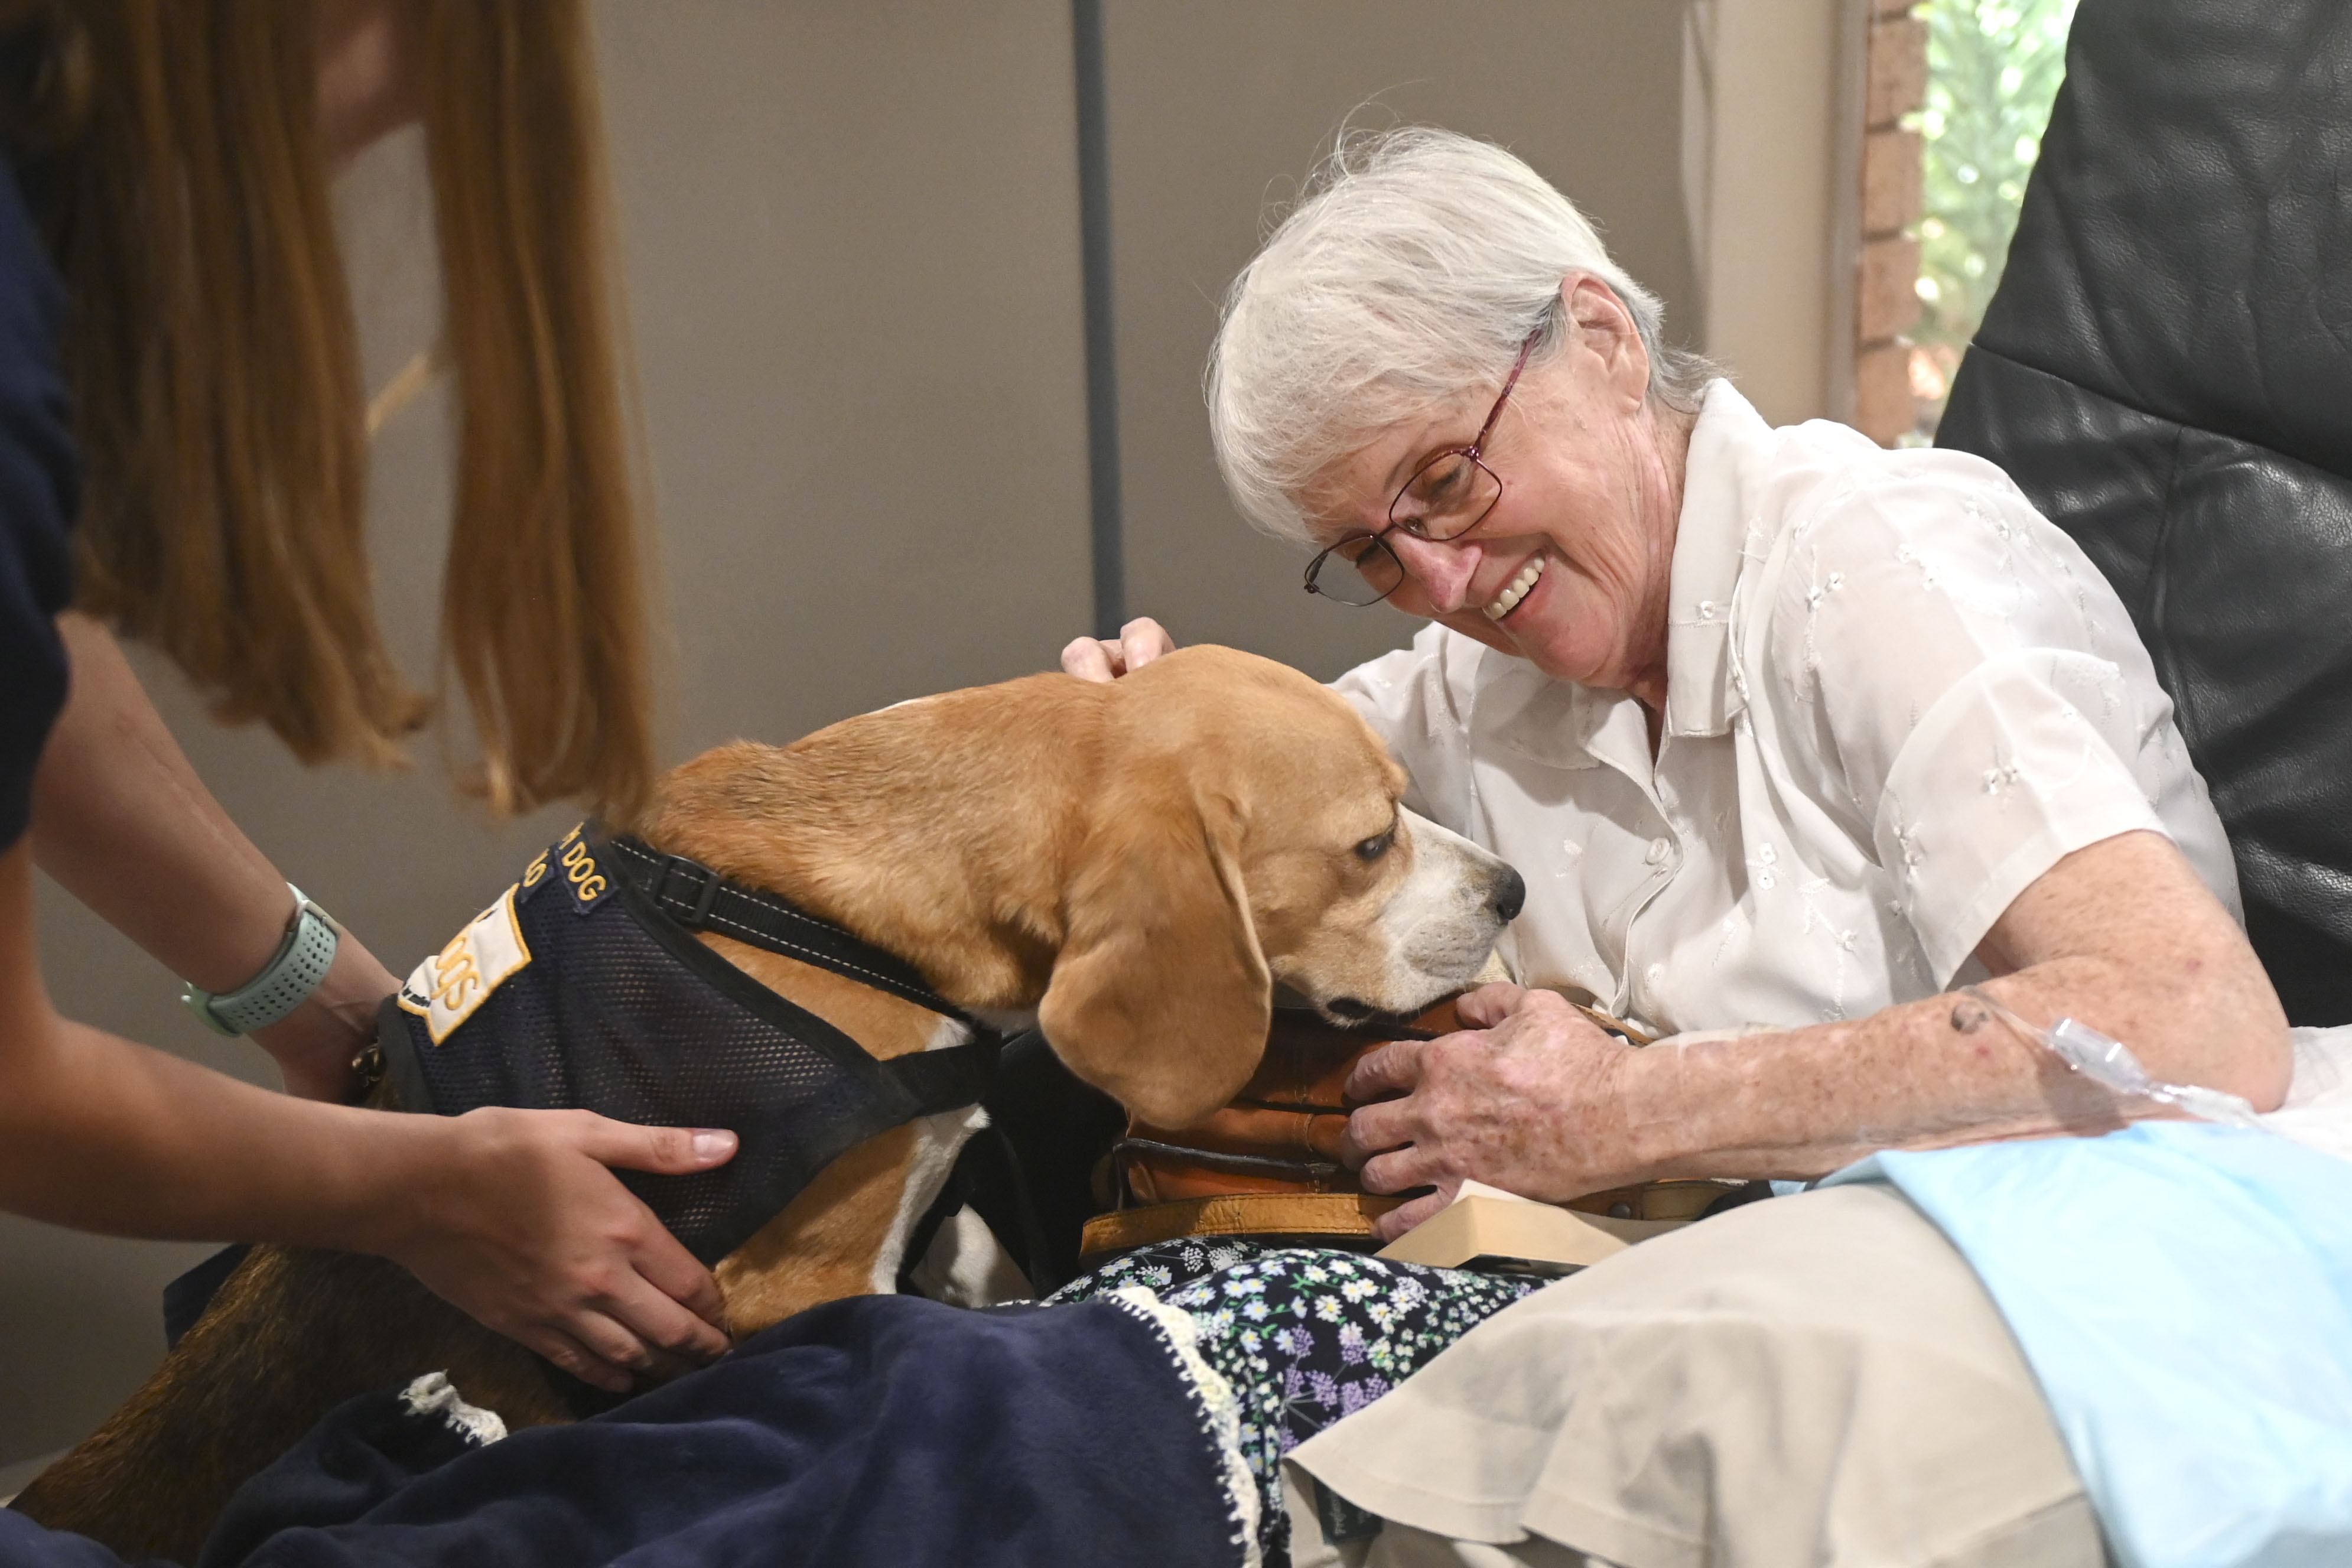 Rolo (Beagle) cheers Gayle Fritteli (77) in the Oncology unit of Life Wilgers Hospital on November 21, 2022 in Pretoria, South Africa. Four Top therapy dogs visited the Oncology unit to improve patients' state of mind. (Photo by Gallo Images/Beeld/Deaan Vivier)